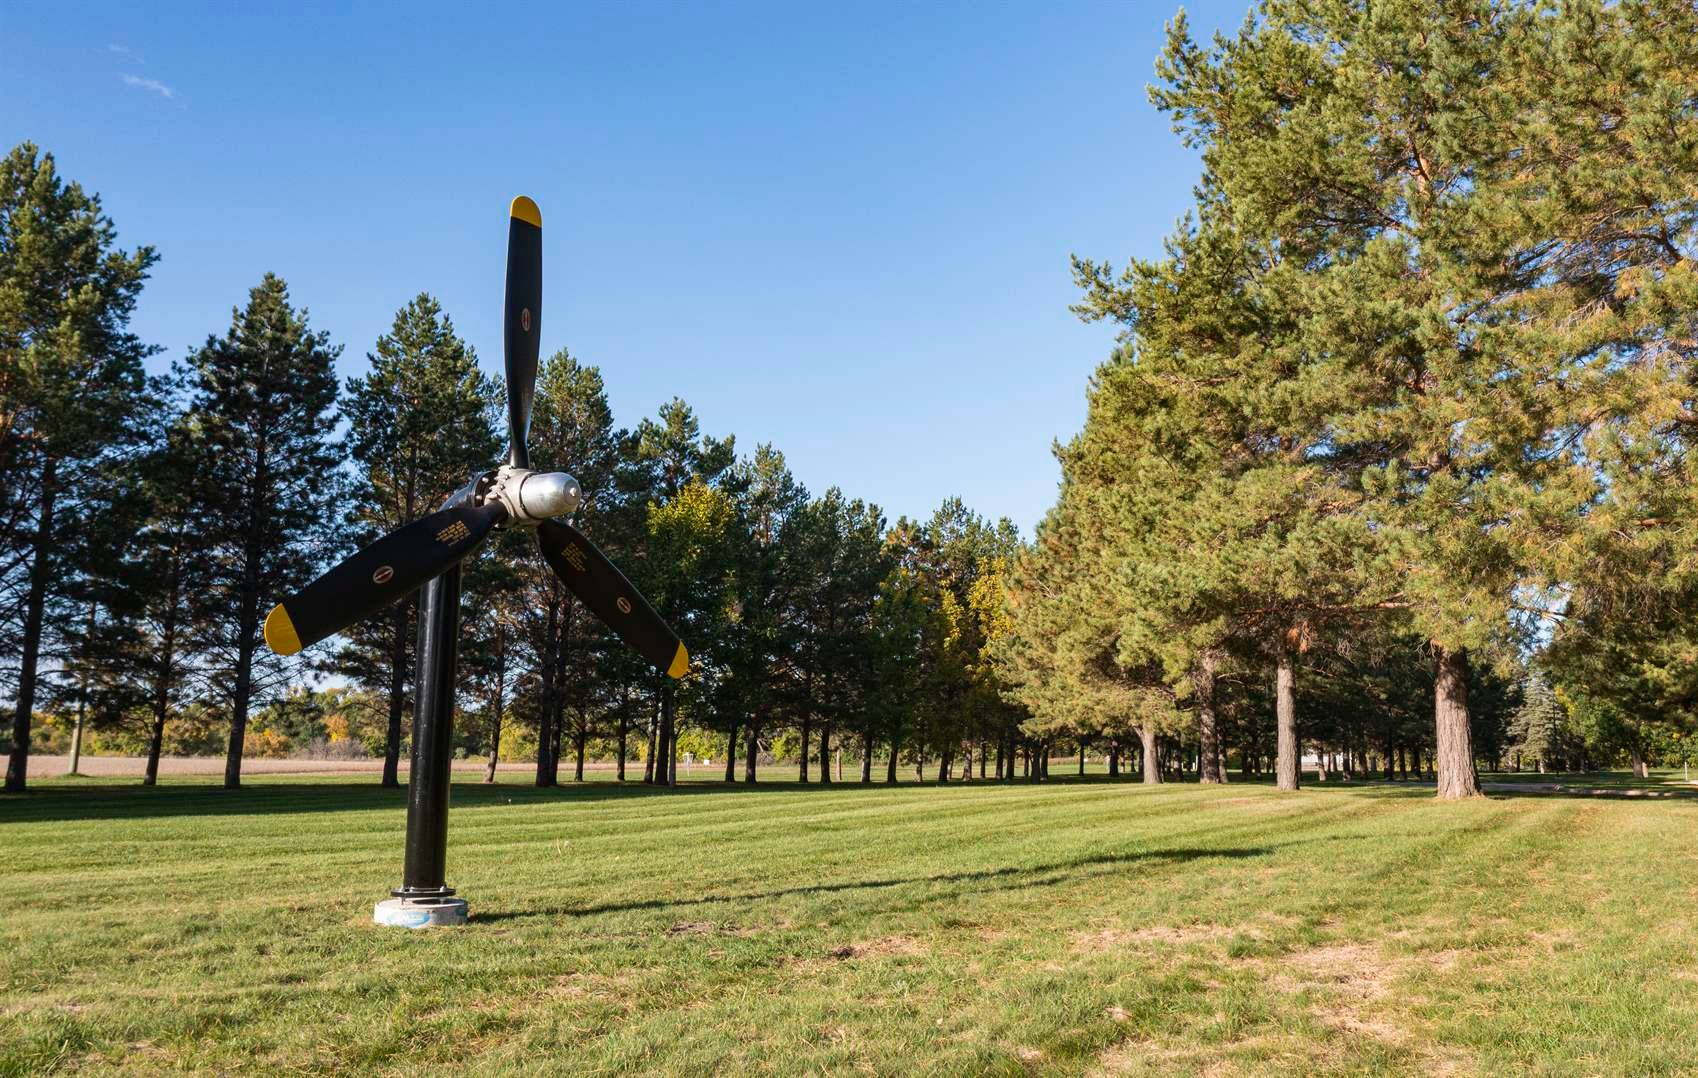 A propeller on green space within the grounds of the North Dakota Veterans Home.